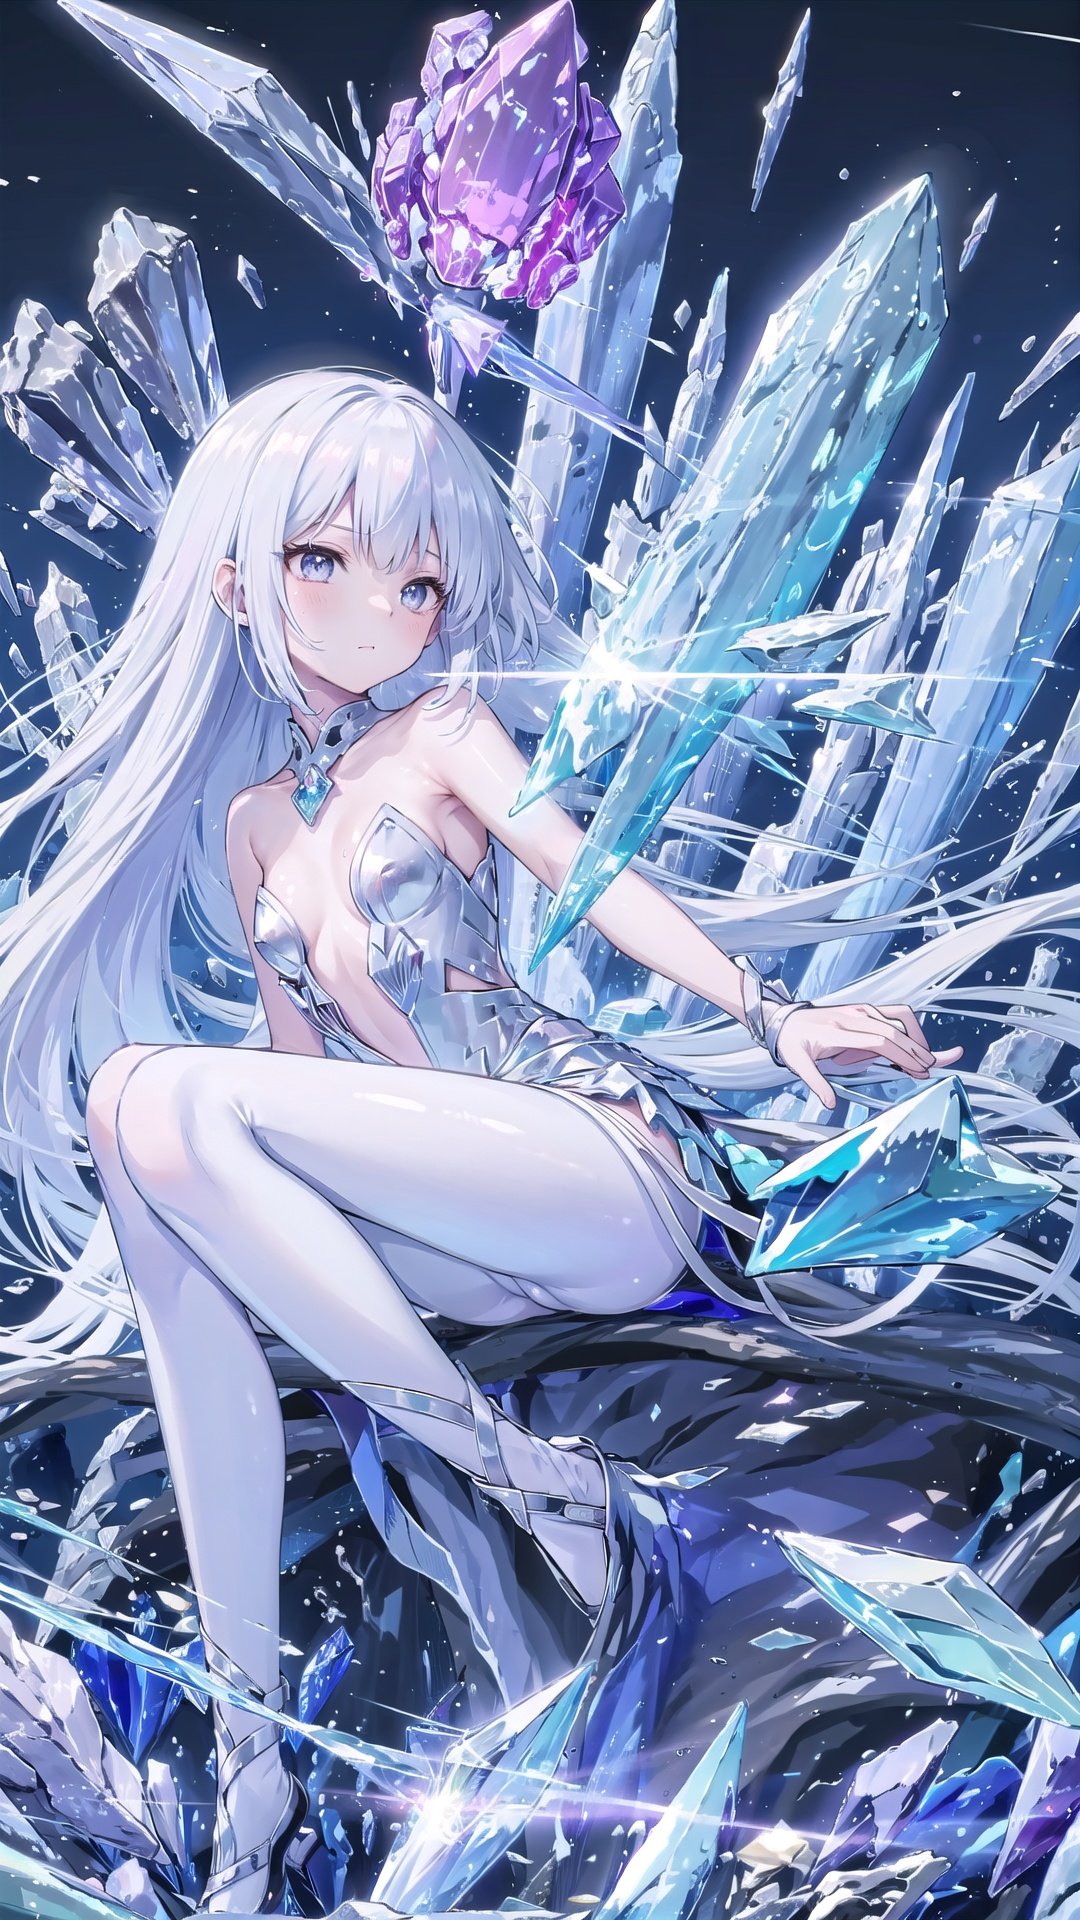  masterpiece, best quality, masterpiece,best quality,official art,extremely detailed CG unity 16k wallpaper,masterpiece, ((1girl)),(science fiction:1.1), (ultra-detailed crystallization:1.5), (crystallizing girl:1.5), kaleidoscope, ((iridescent:1.5) long hair), (glittering silver eyes), sitting, surrounded by colorful crystals, blue skin, (skin fusion with crystal:1.8), looking up, face focus, simple dress, transparent crystals, flat dark background, lens flare, prism, mz-hd